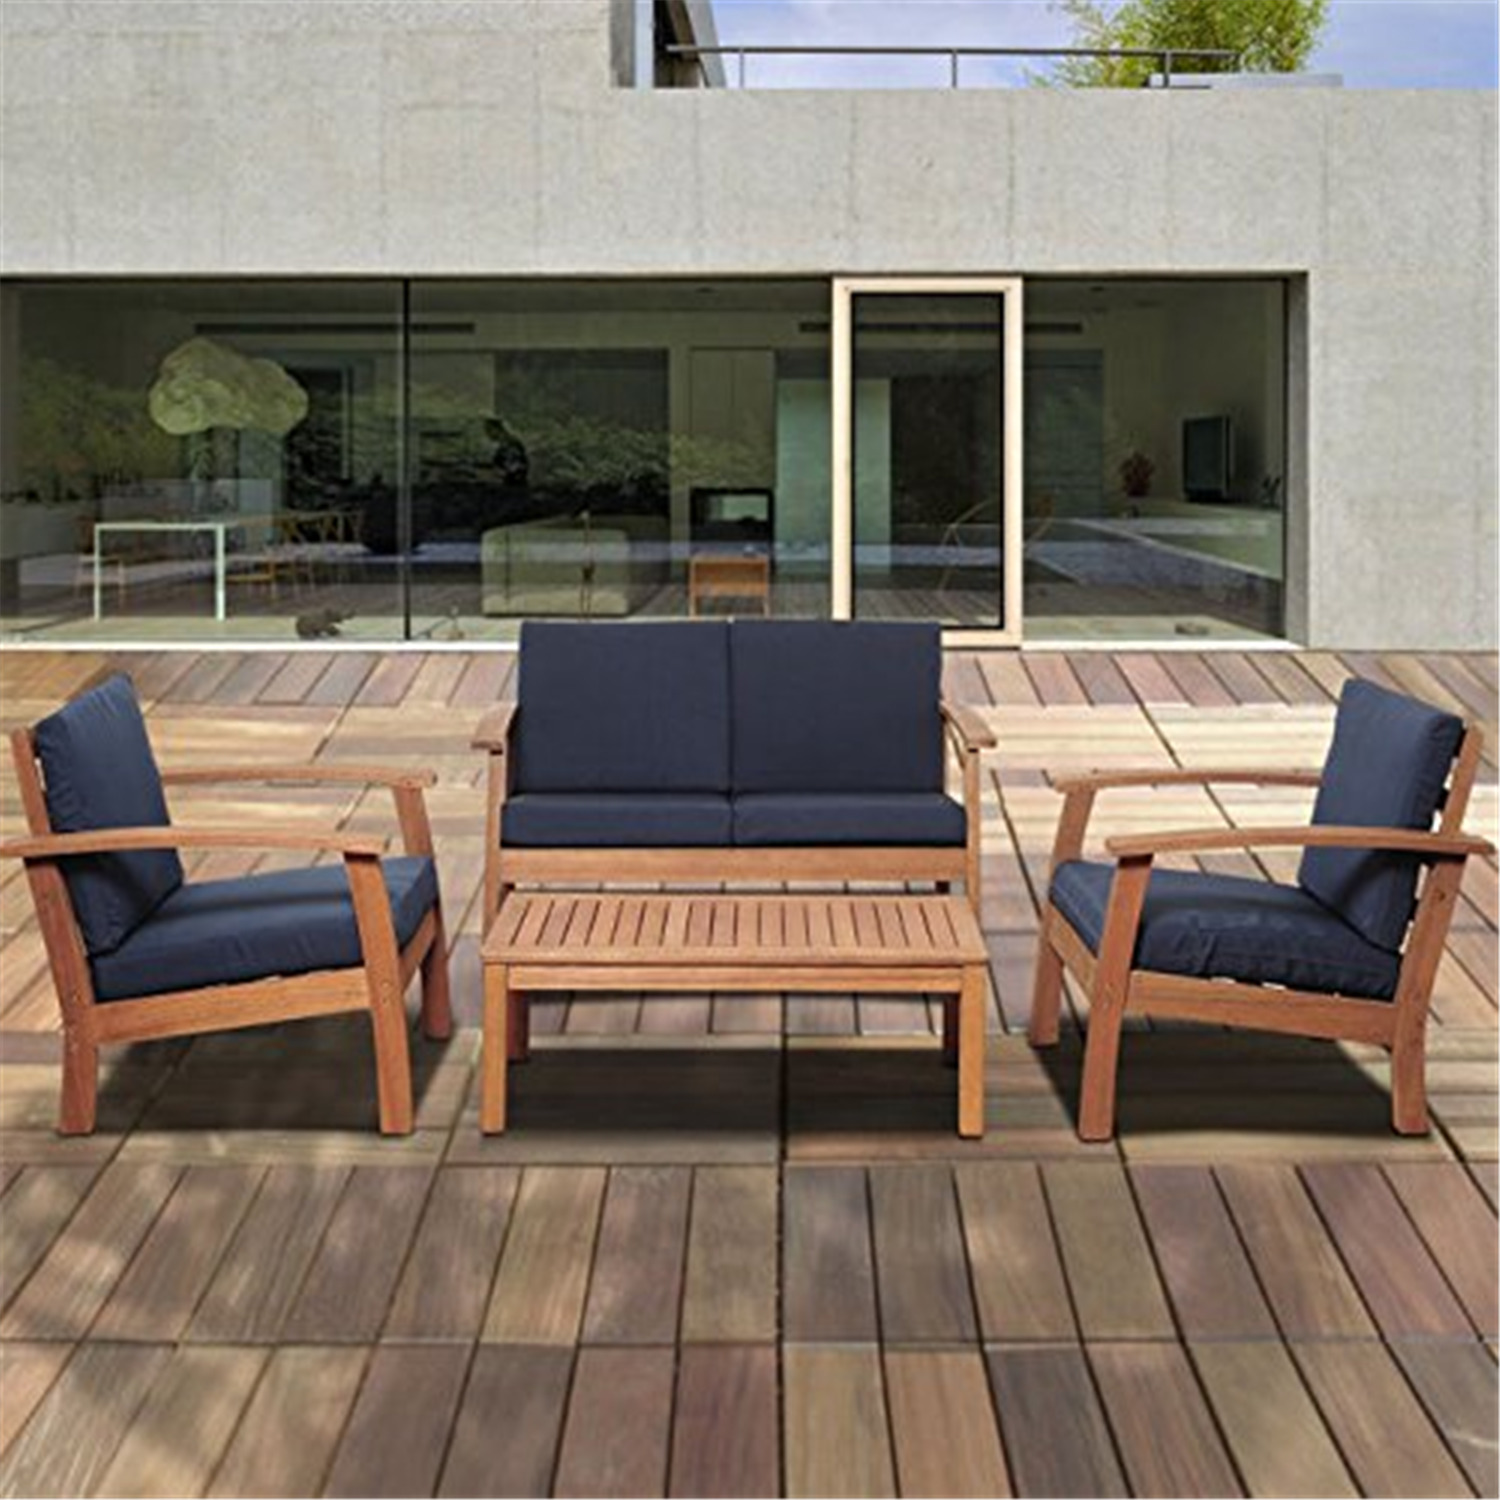 International Home Amazonia 4 Piece Outdoor Sofa Set in Brown - image 1 of 4